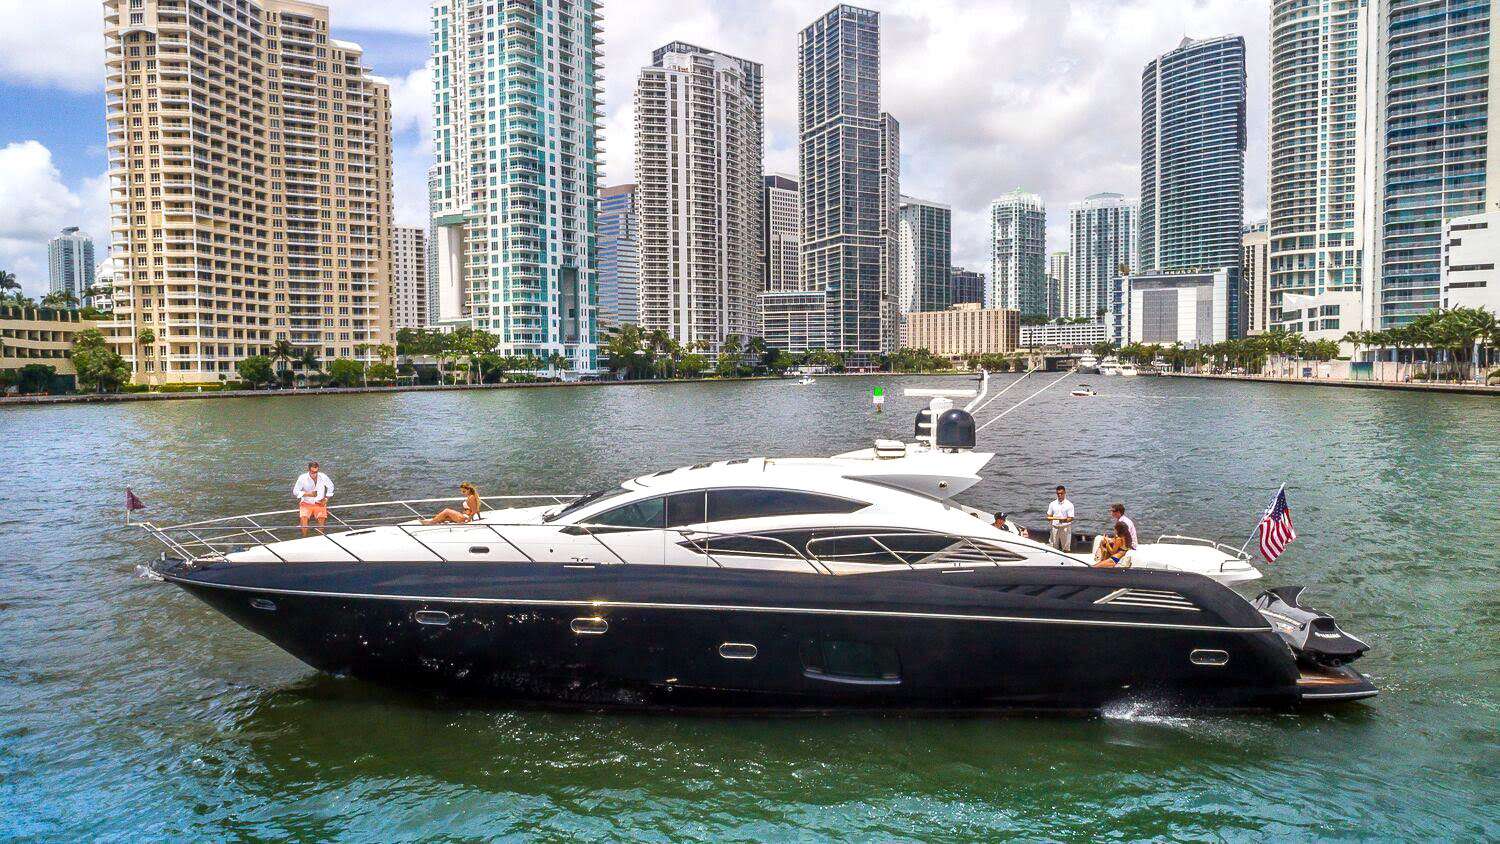 All In - Motor Boat Charter USA & Boat hire in Florida & Bahamas 1